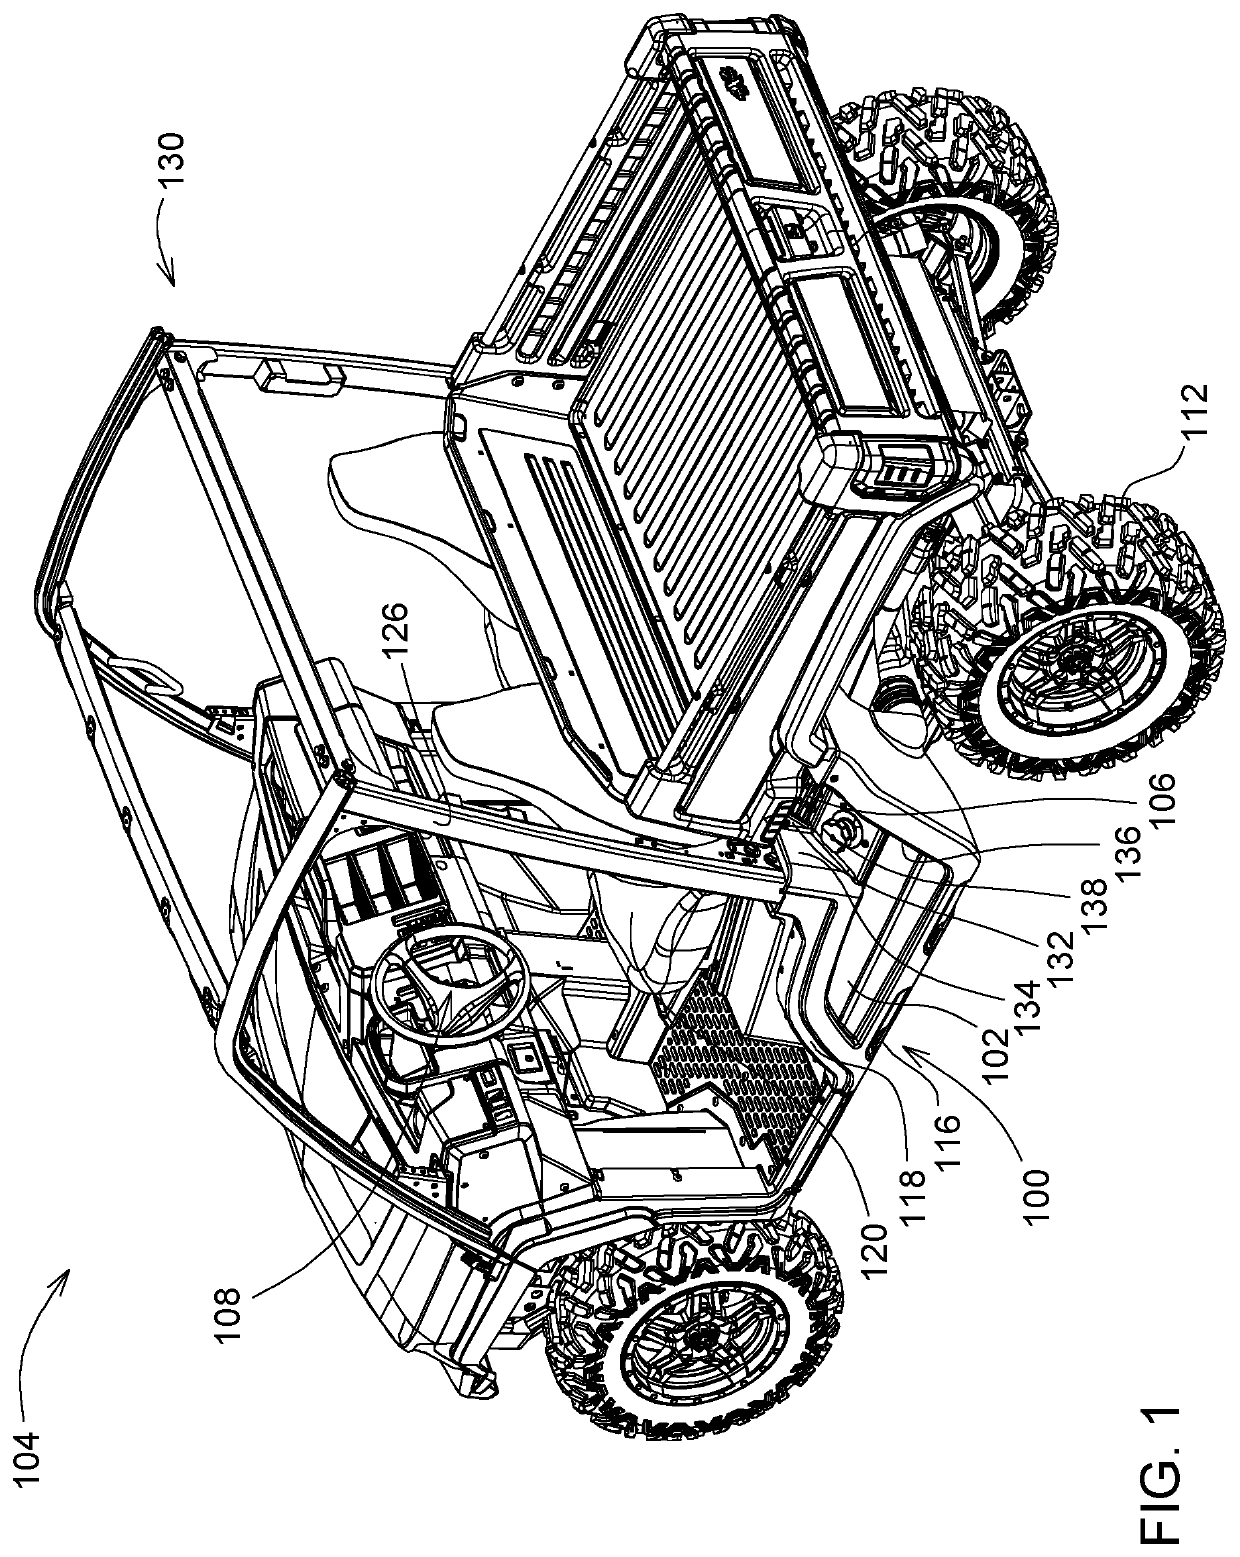 Continuously variable transmission air intake assembly